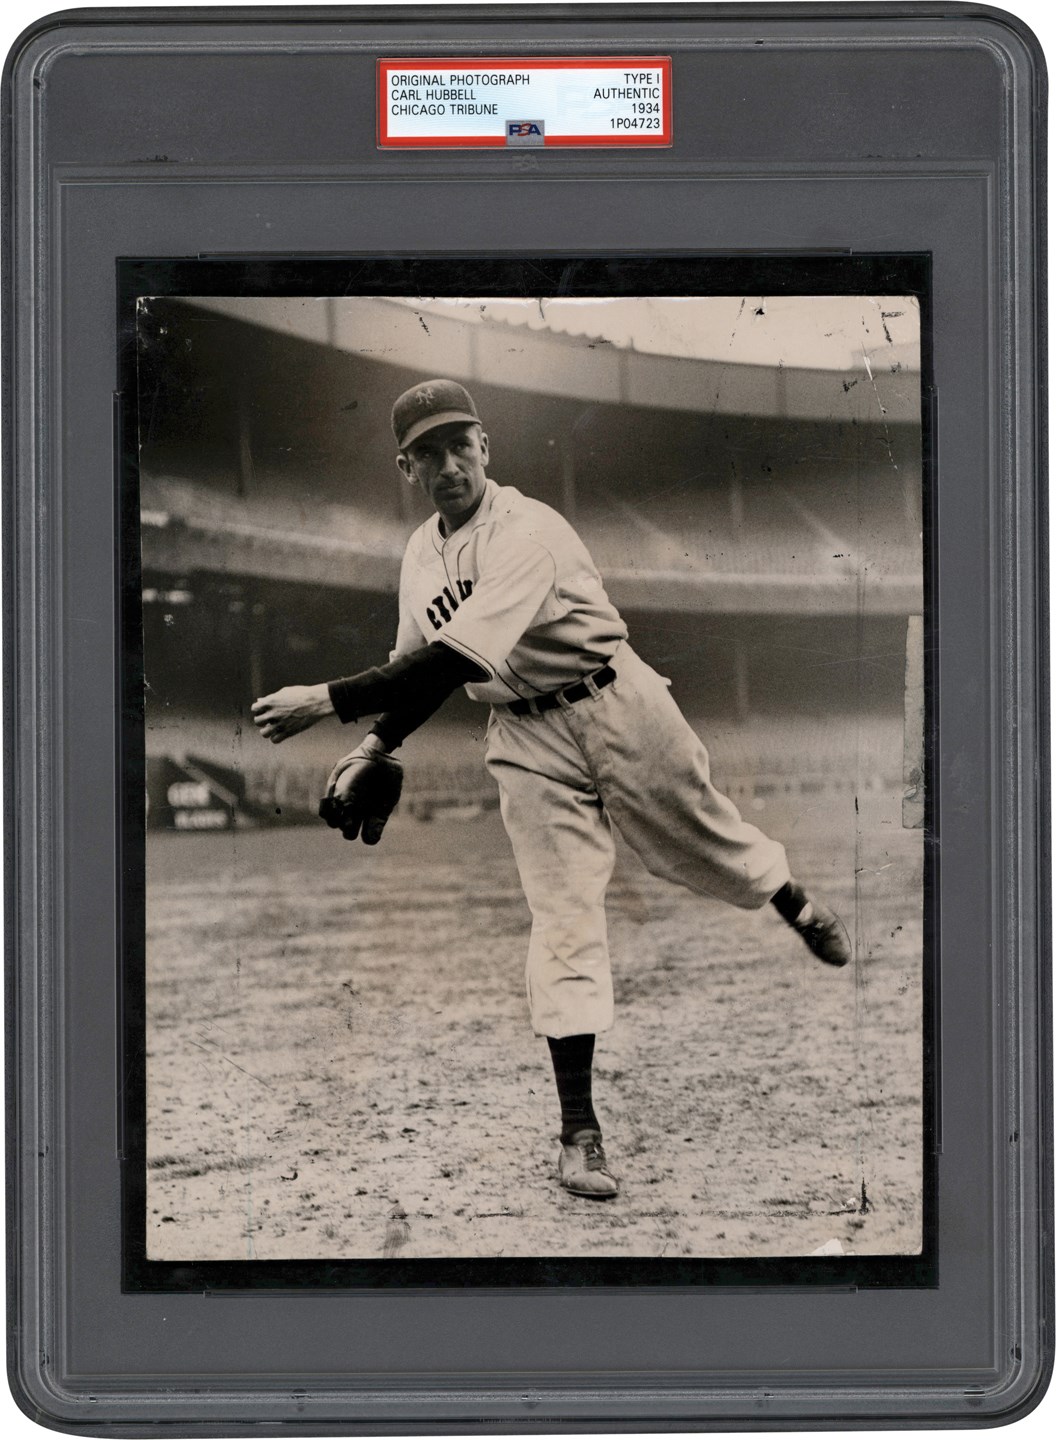 - 1934 Carl Hubbell Photograph - Historic 1934 All Star Appearance (PSA Type I)